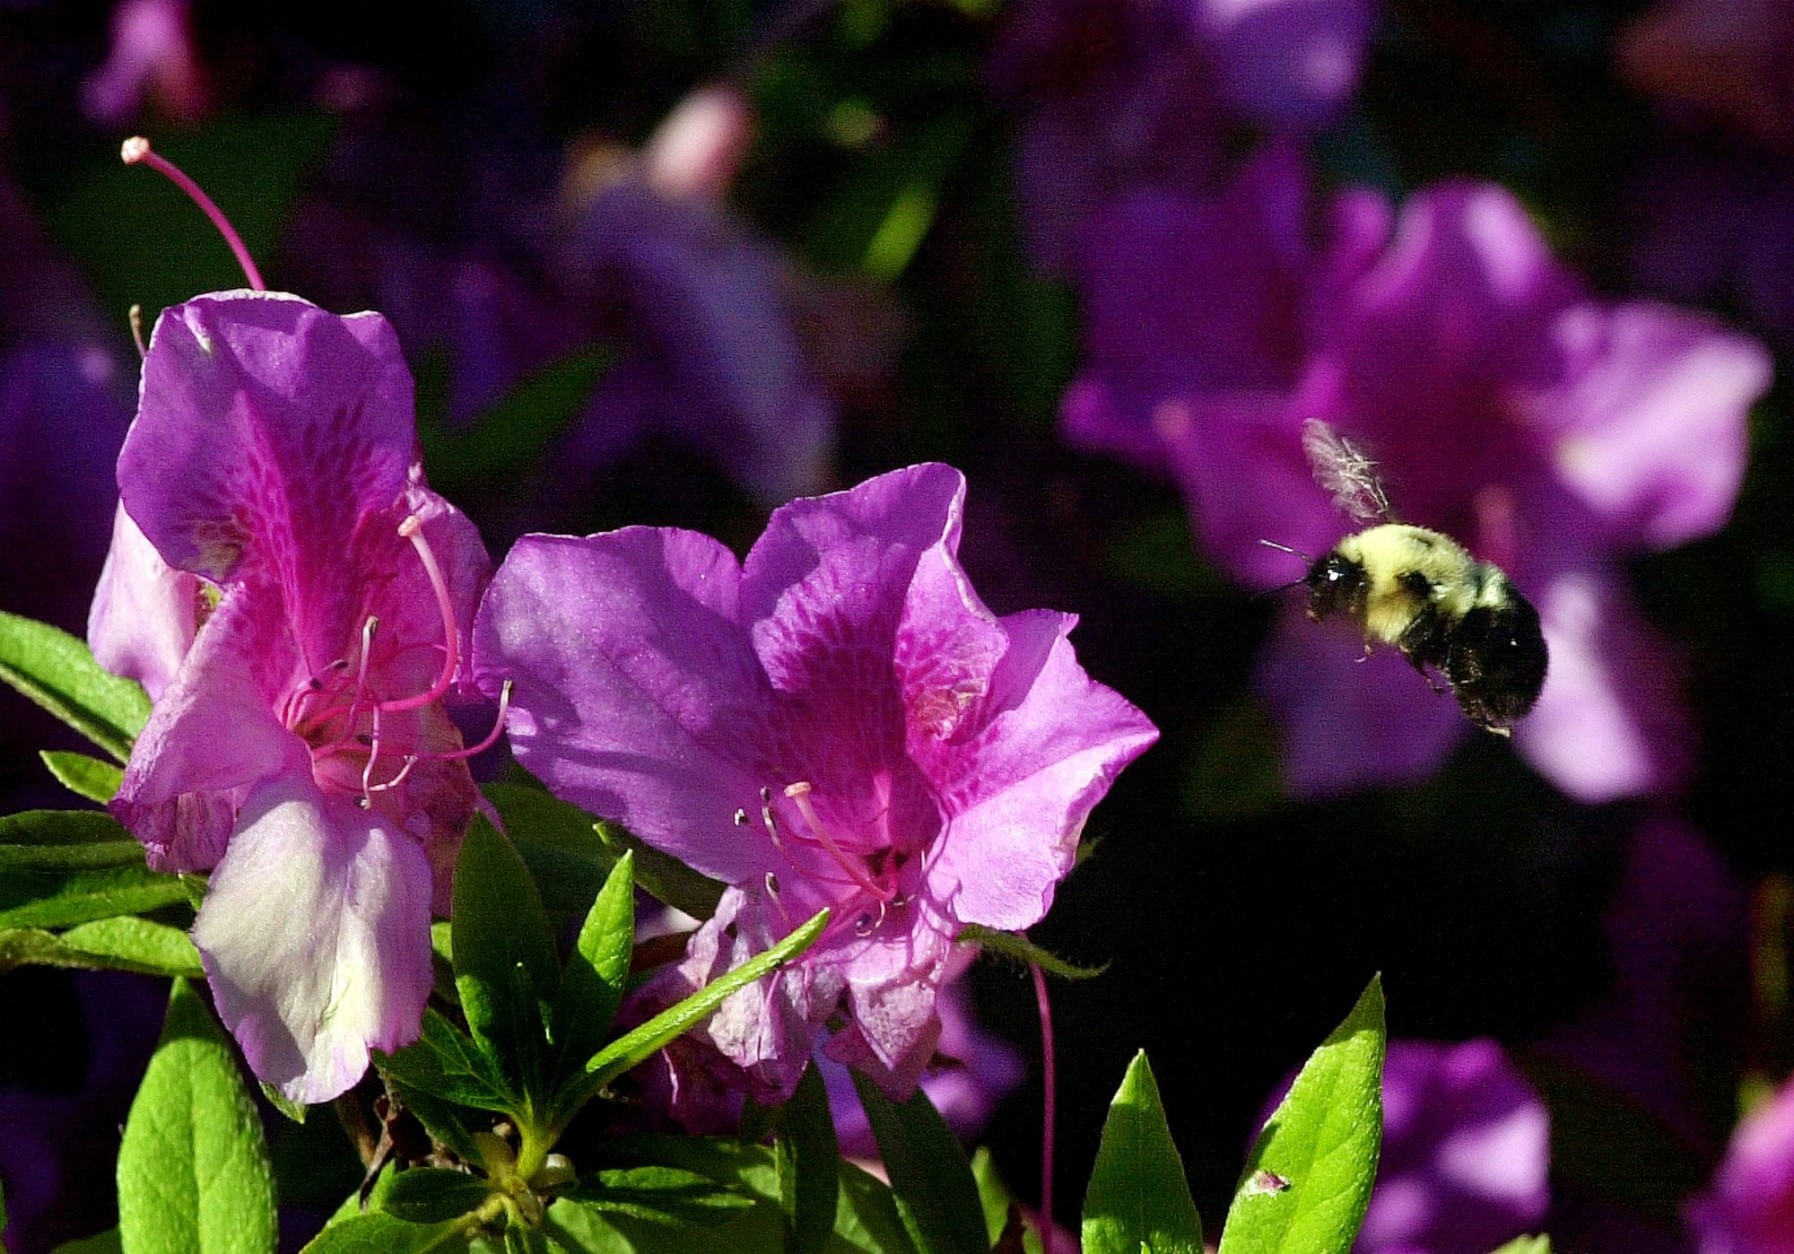 A bee flies around a bloom on an azalea bush at Norfolk Botanical Garden in Norfolk, Va. Every spring, a quarter of a million azaleas at Norfolk Botanical Garden show off their coral, red, white and lavender blooms.  (AP Photo/Gary C. Knapp)